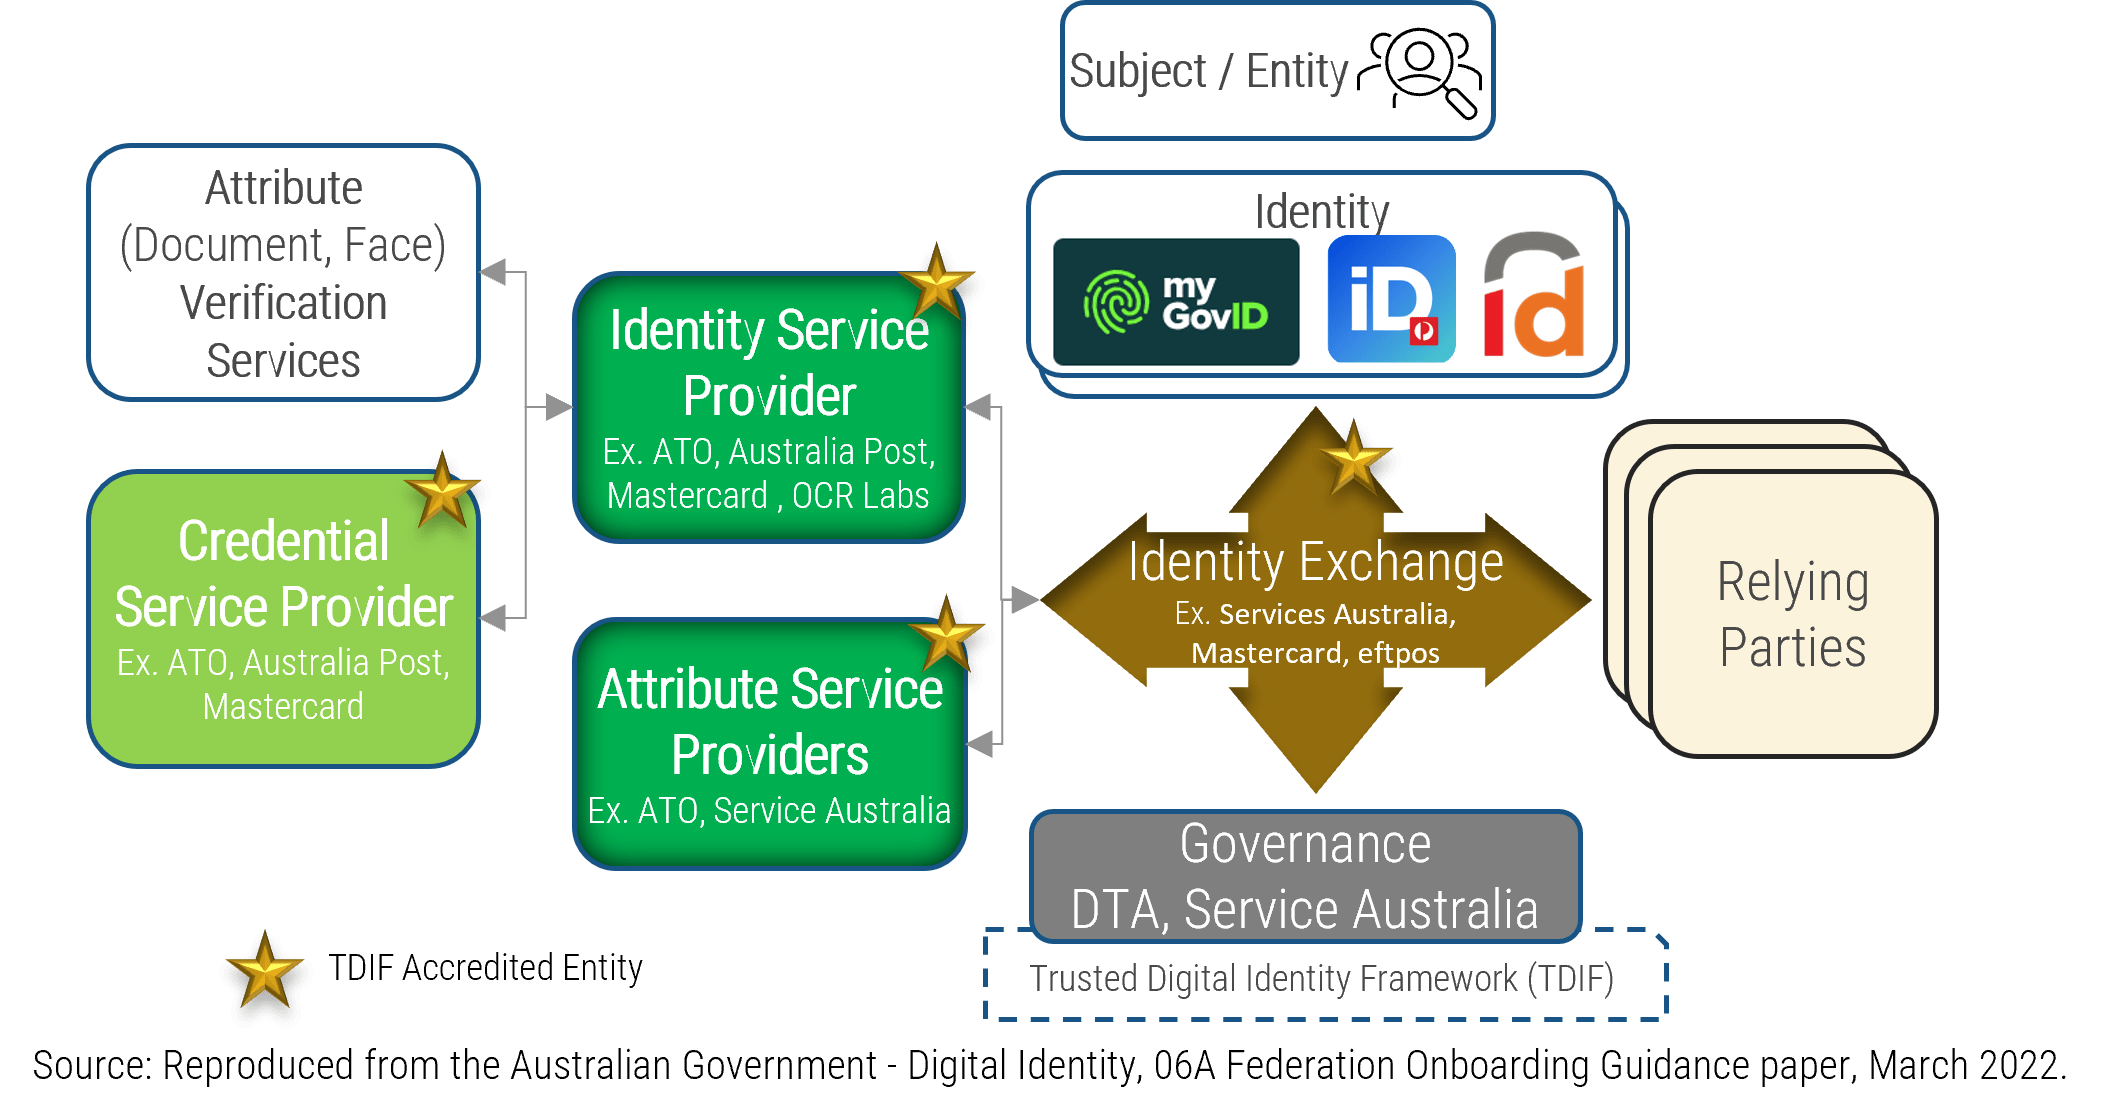 The image contains a screenshot diagram of Digital Identity.